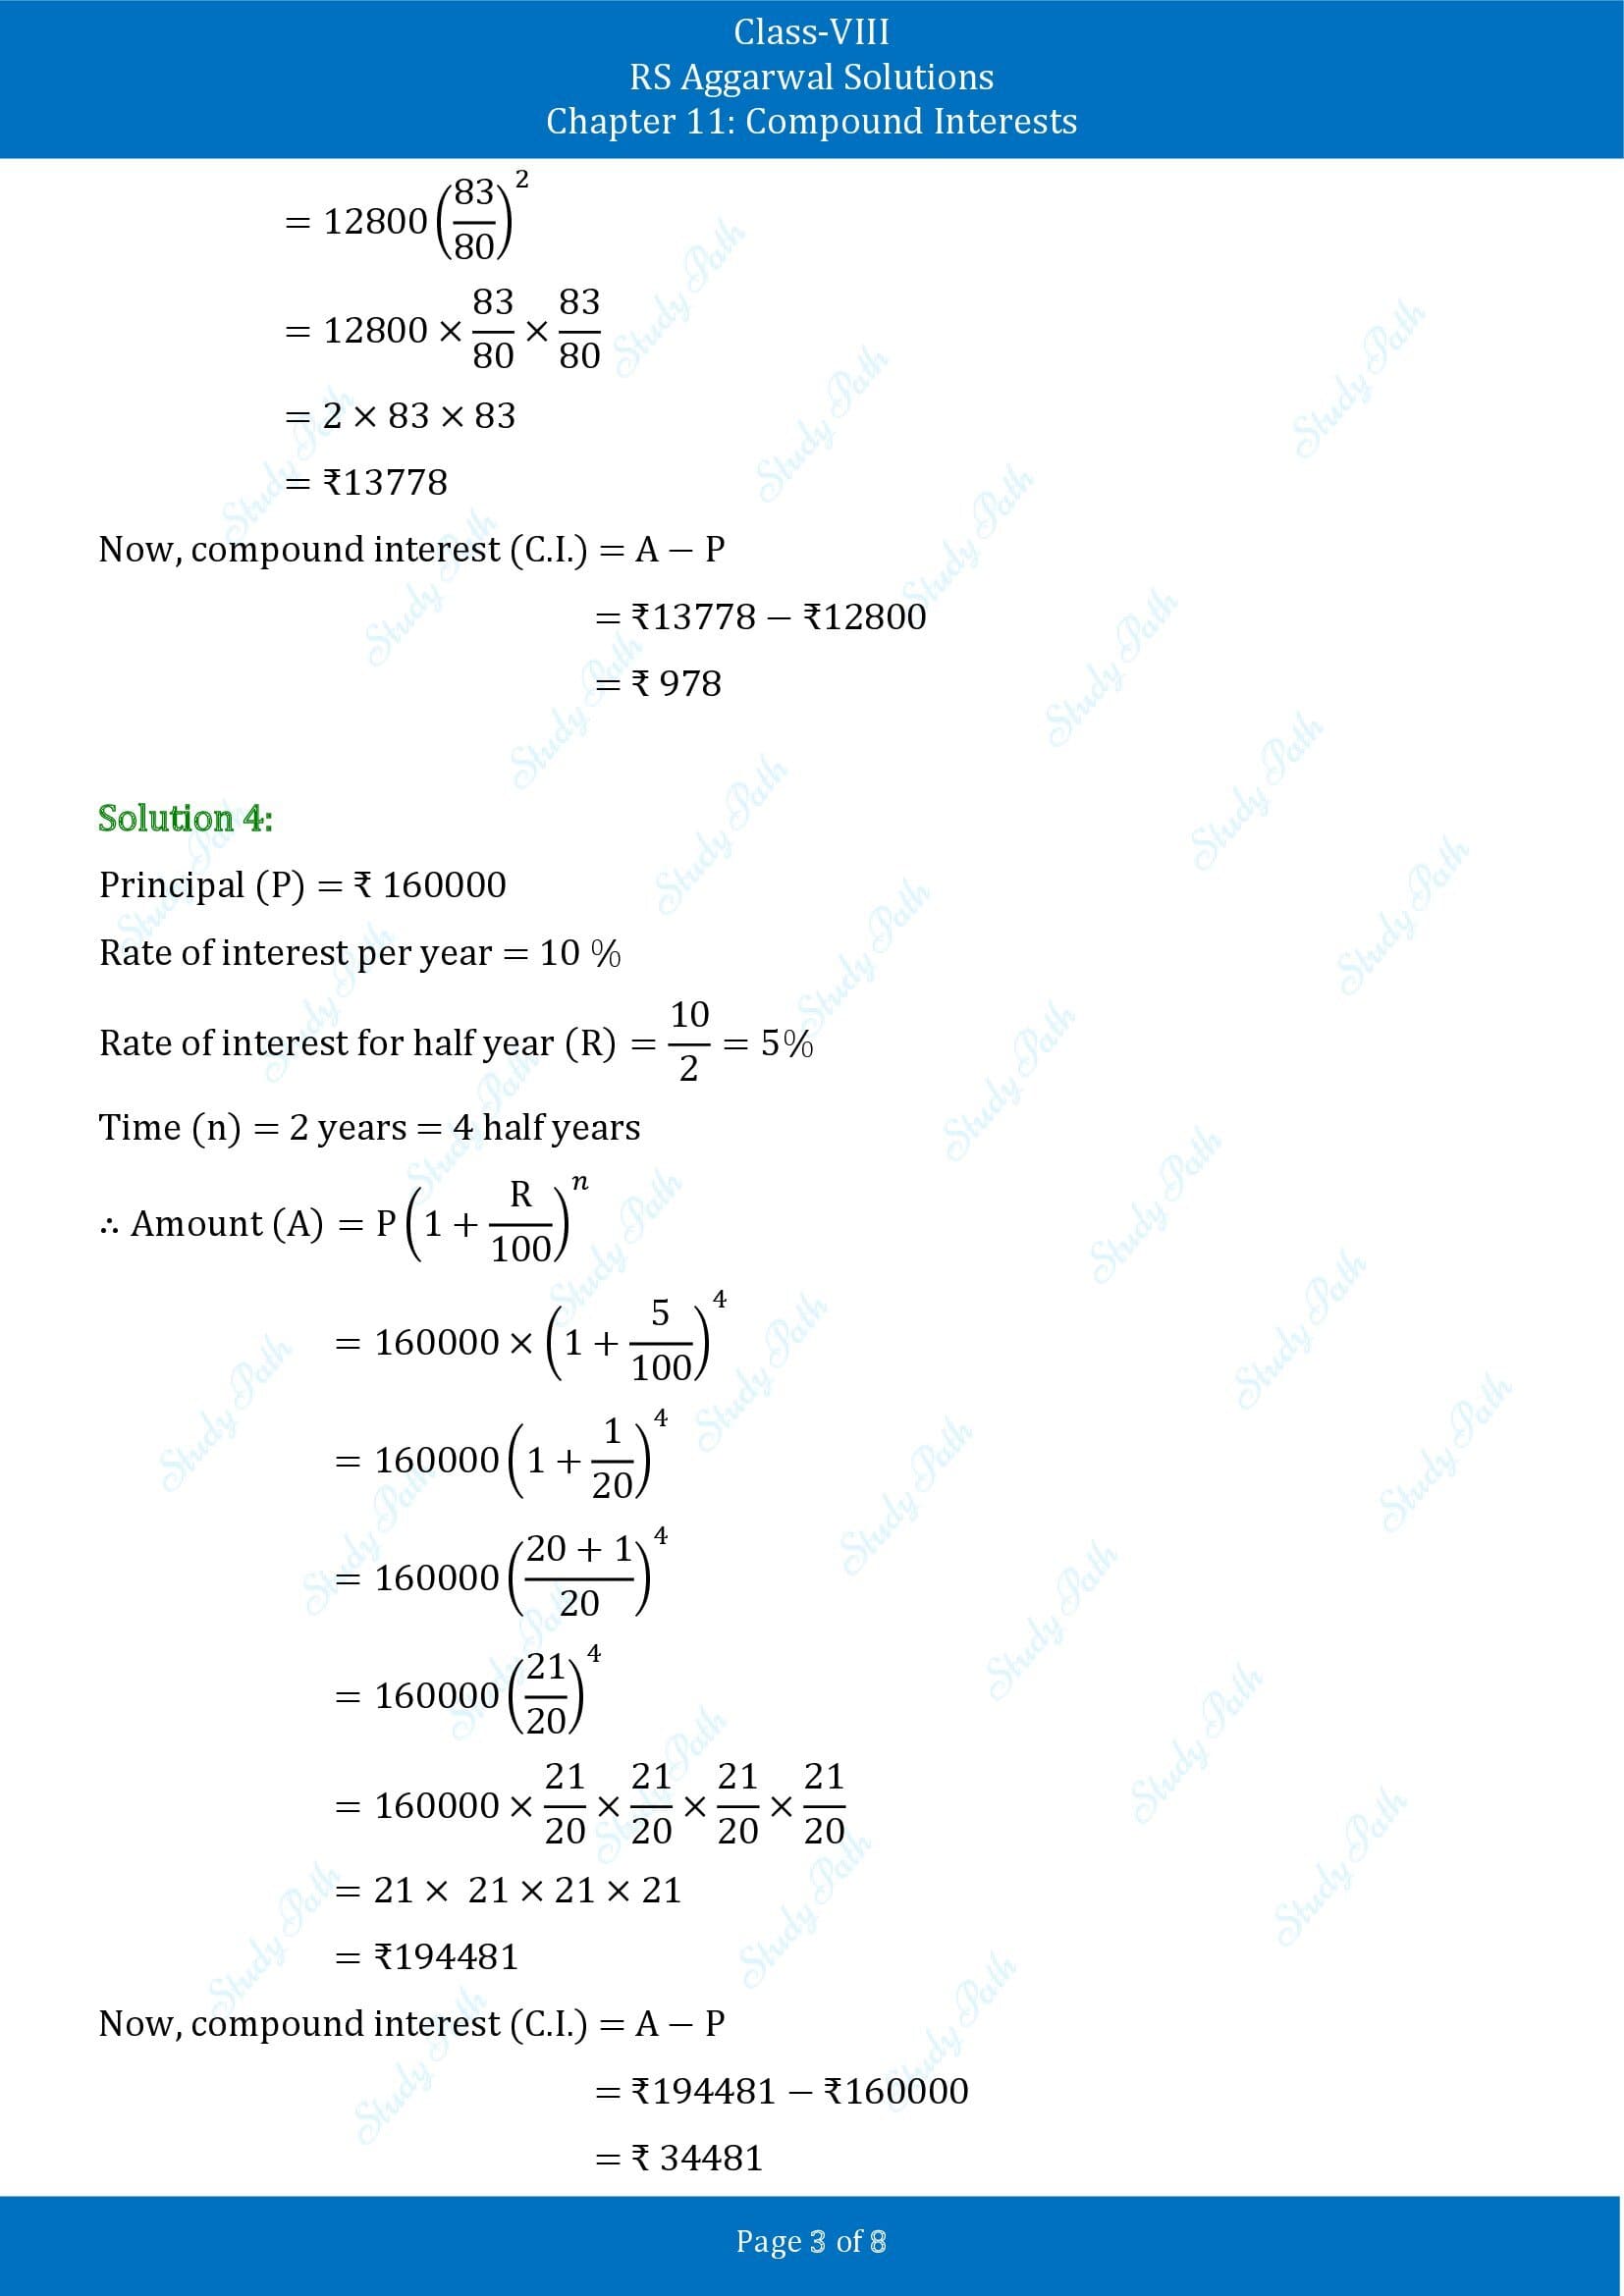 RS Aggarwal Solutions Class 8 Chapter 11 Compound Interests Exercise 11C 003